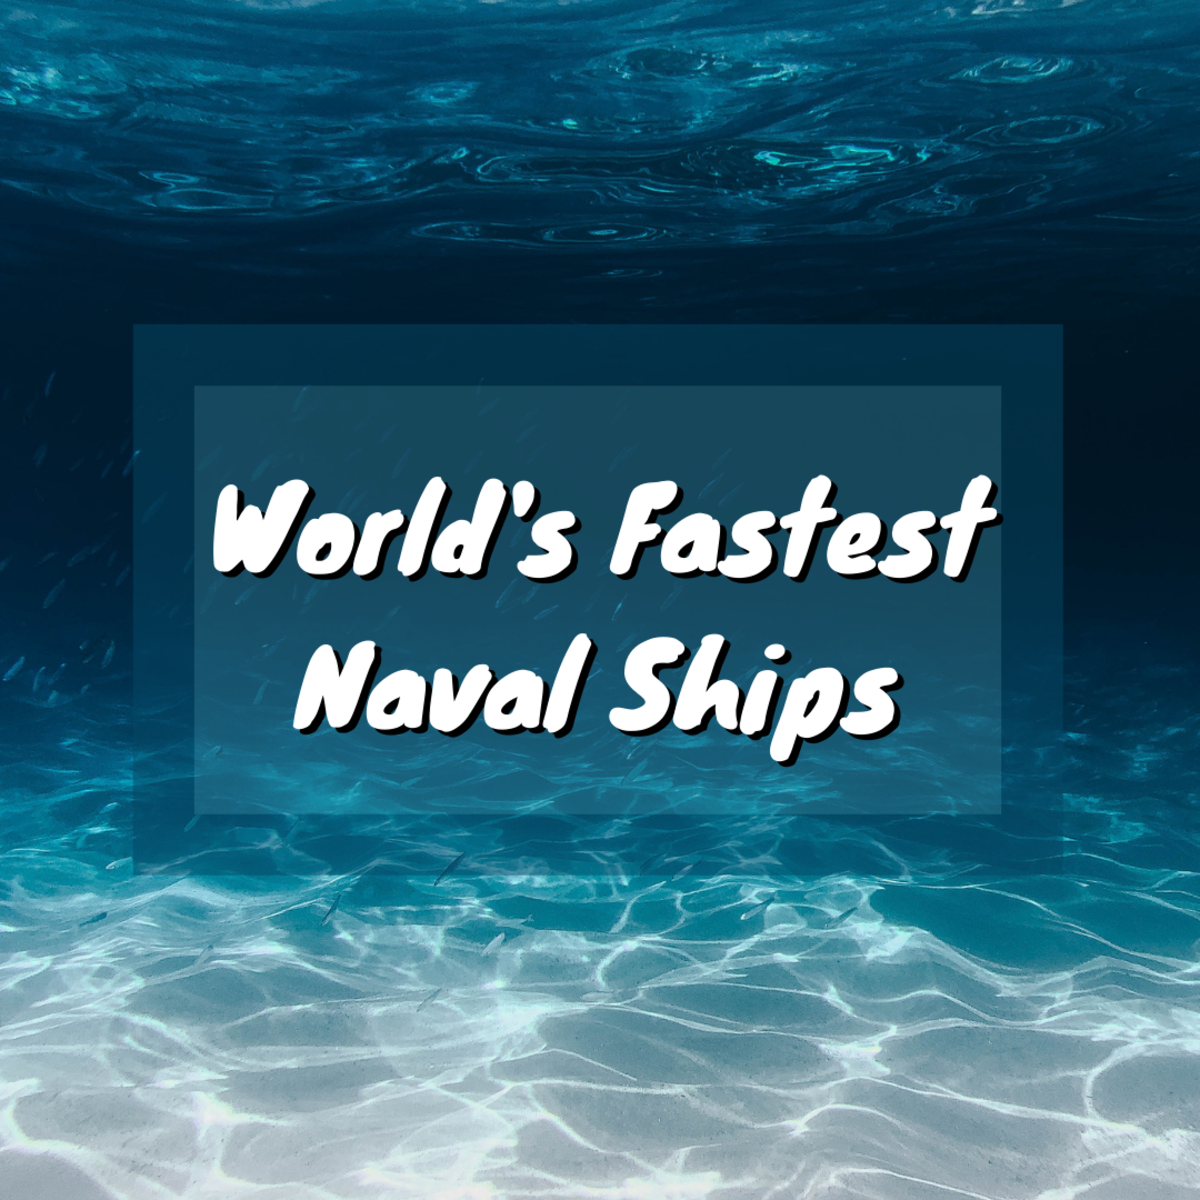 Read on to learn about some of the world's fastest and most fascinating navy ships.